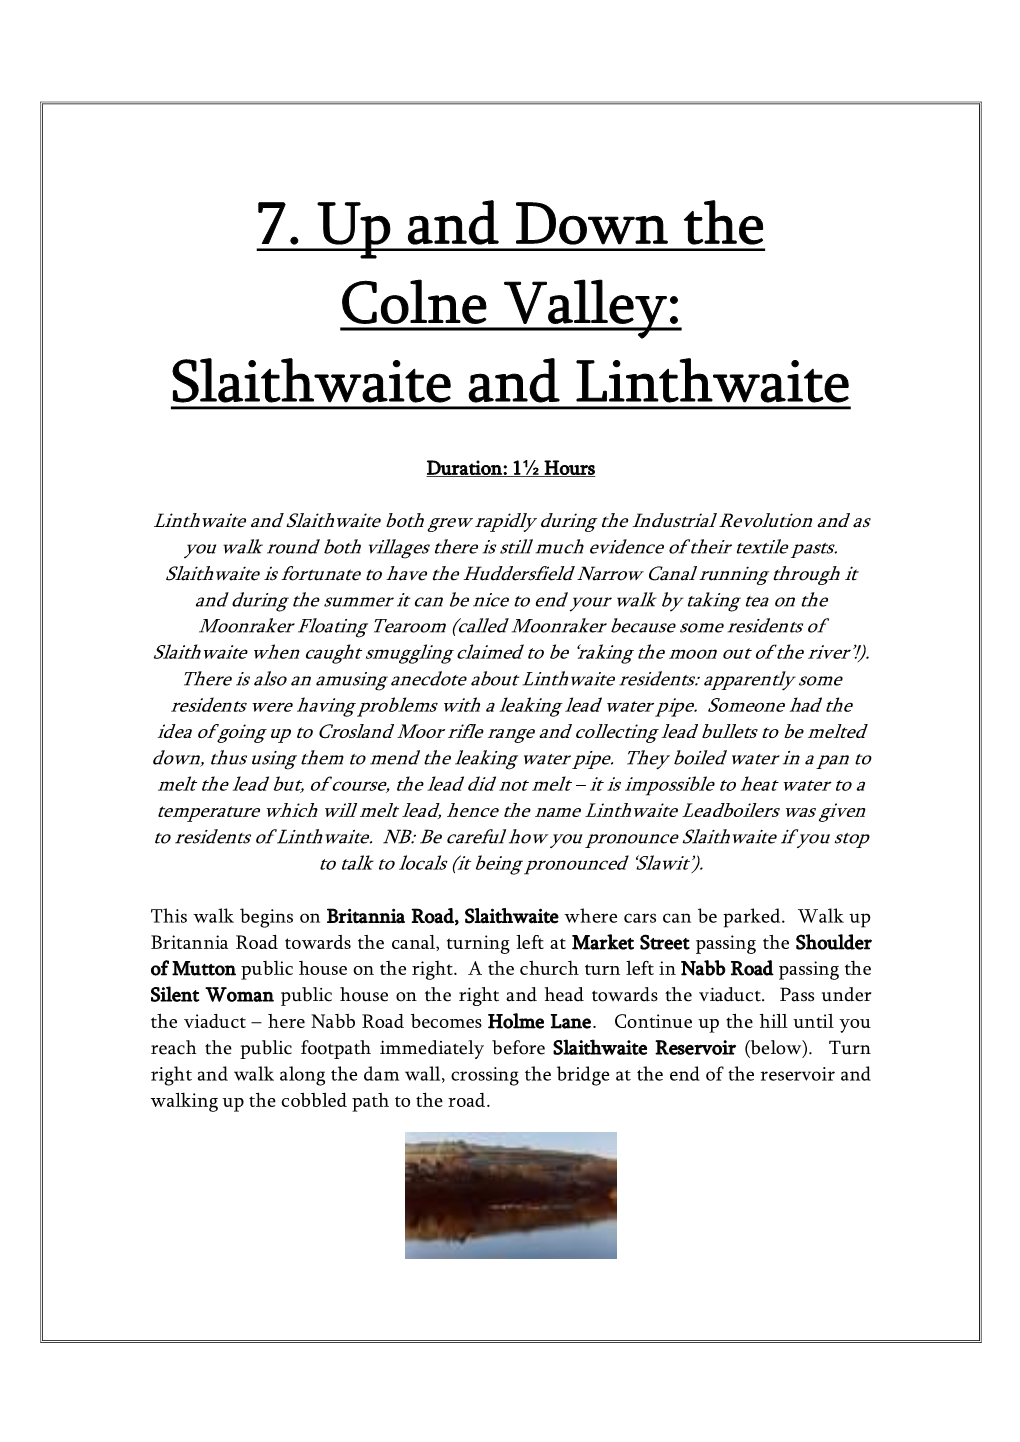 7. up and Down the Colne Valley: Slaithwaite and Linthwaite